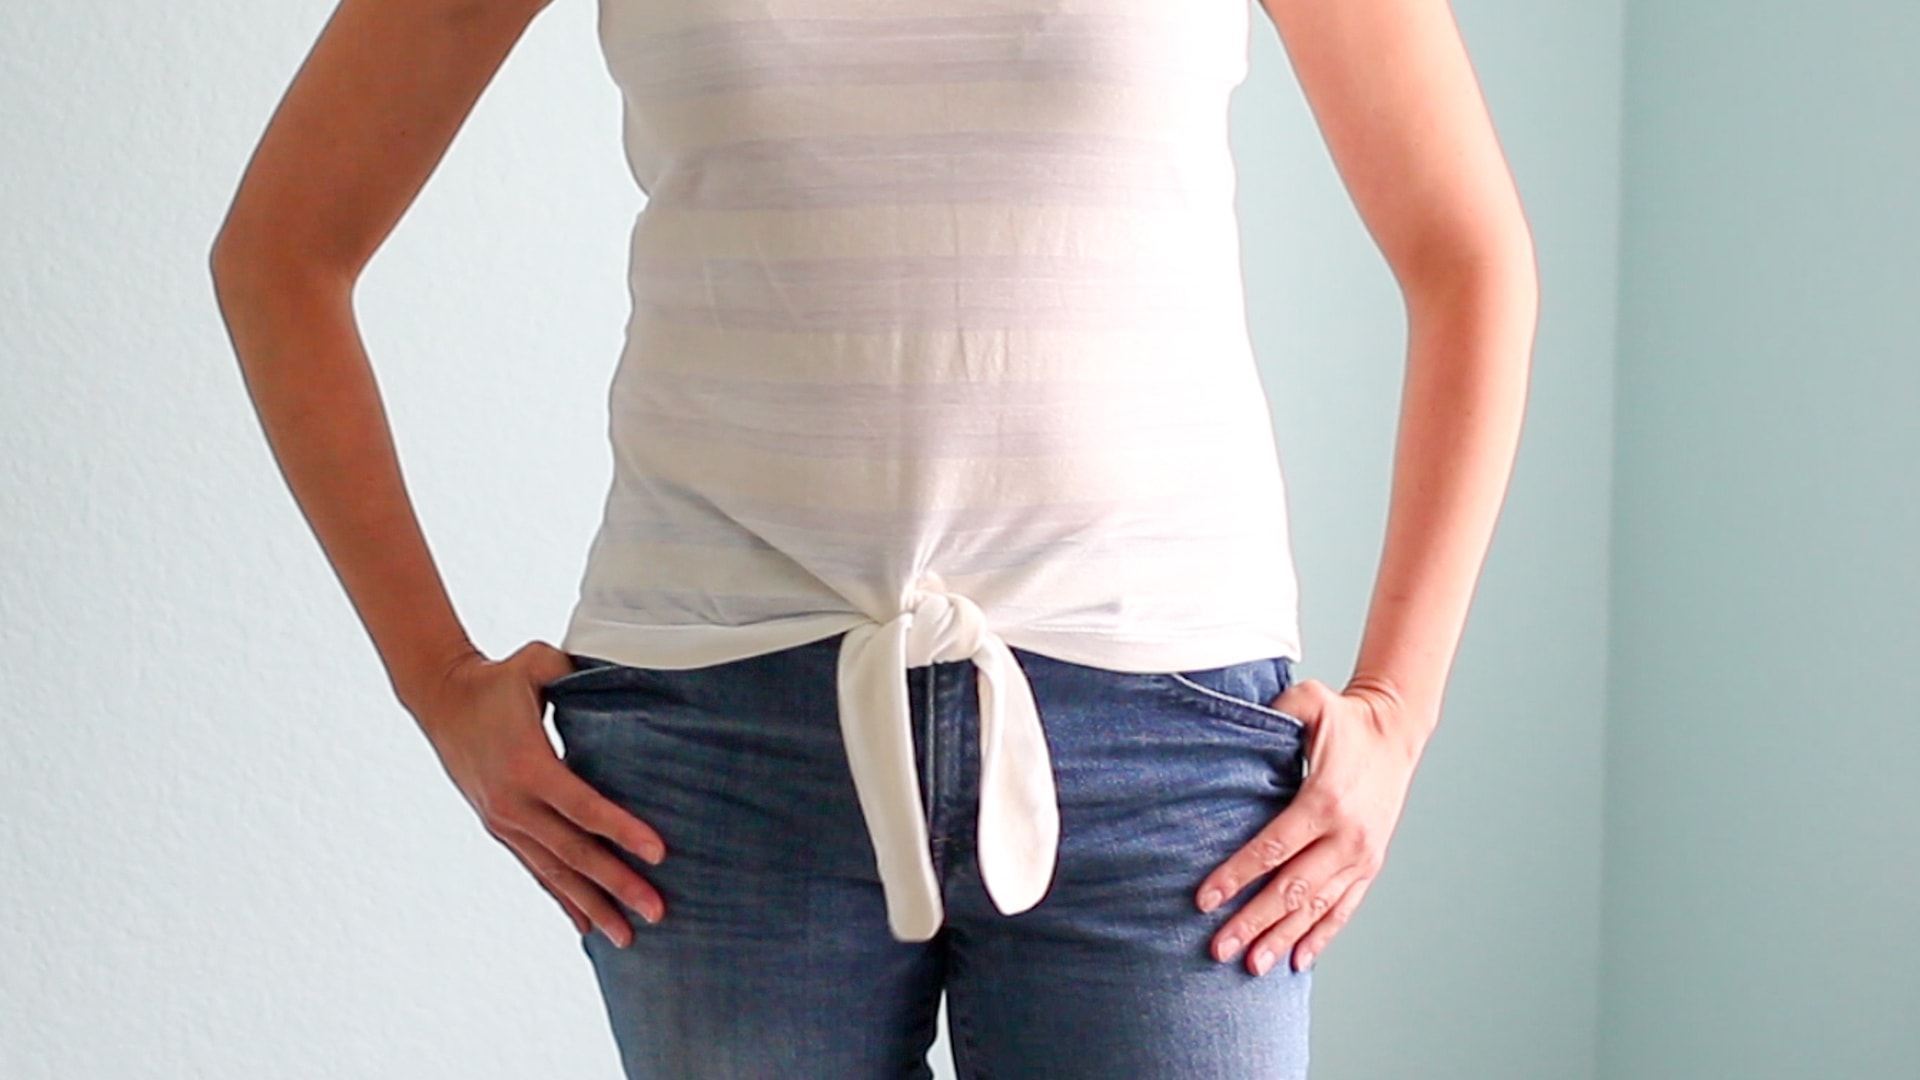 How to sew a knot shirt - turn any shirt (even a store bought one!) into a knot front shirt - sewing tutorial by Melly Sews